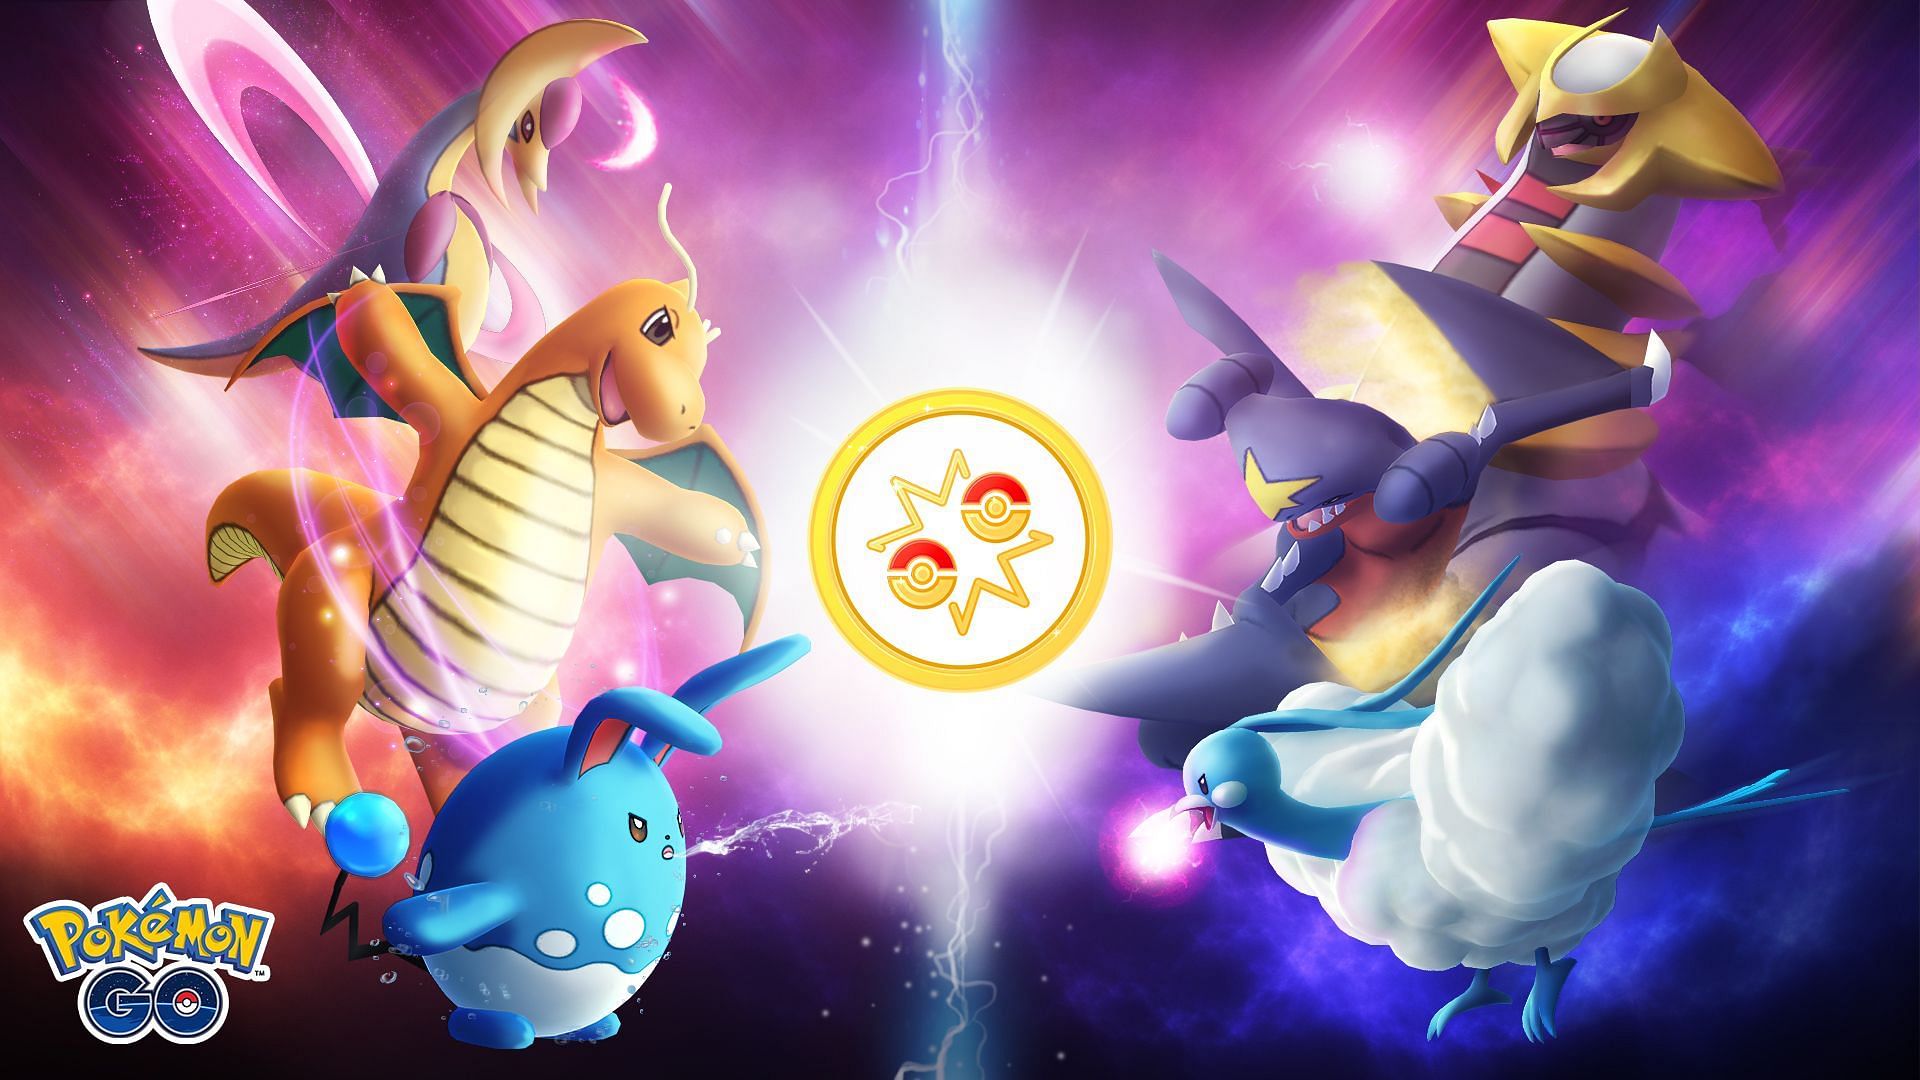 Dragonite and Garchomp can be potent options in Ultra League (Image via Niantic)